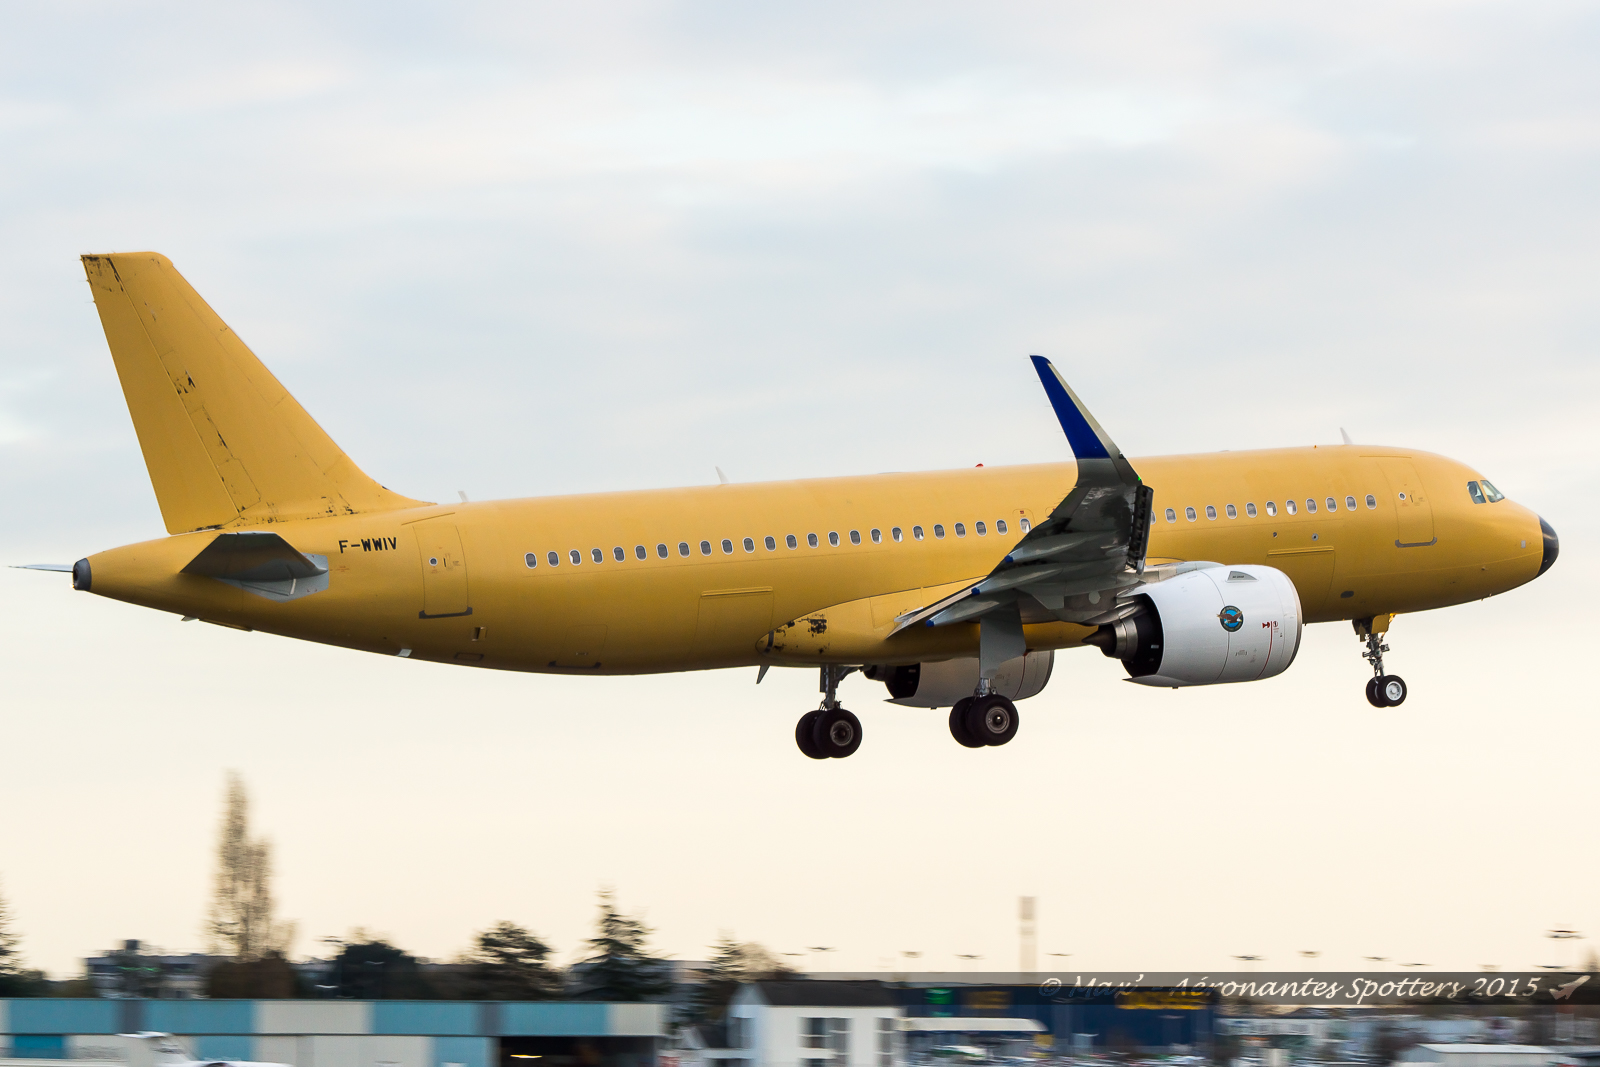 [28-11-2015] A320- NEO F-WWIV  15121905364720738313841194